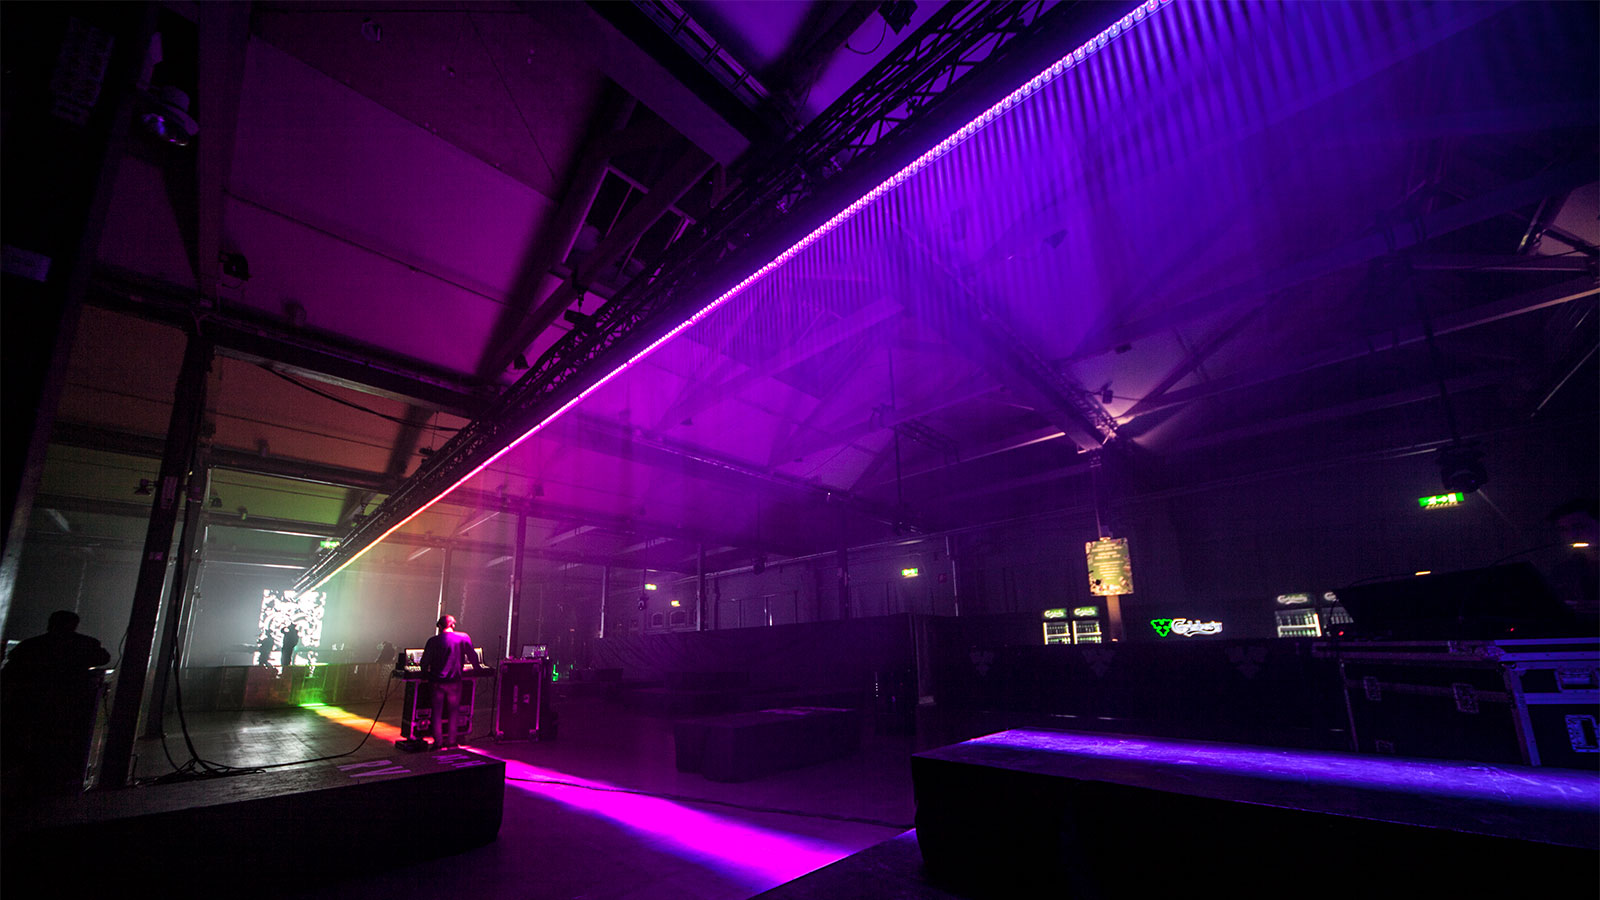 Anders Heberling digs deep into the LED portfolio for largest party ever